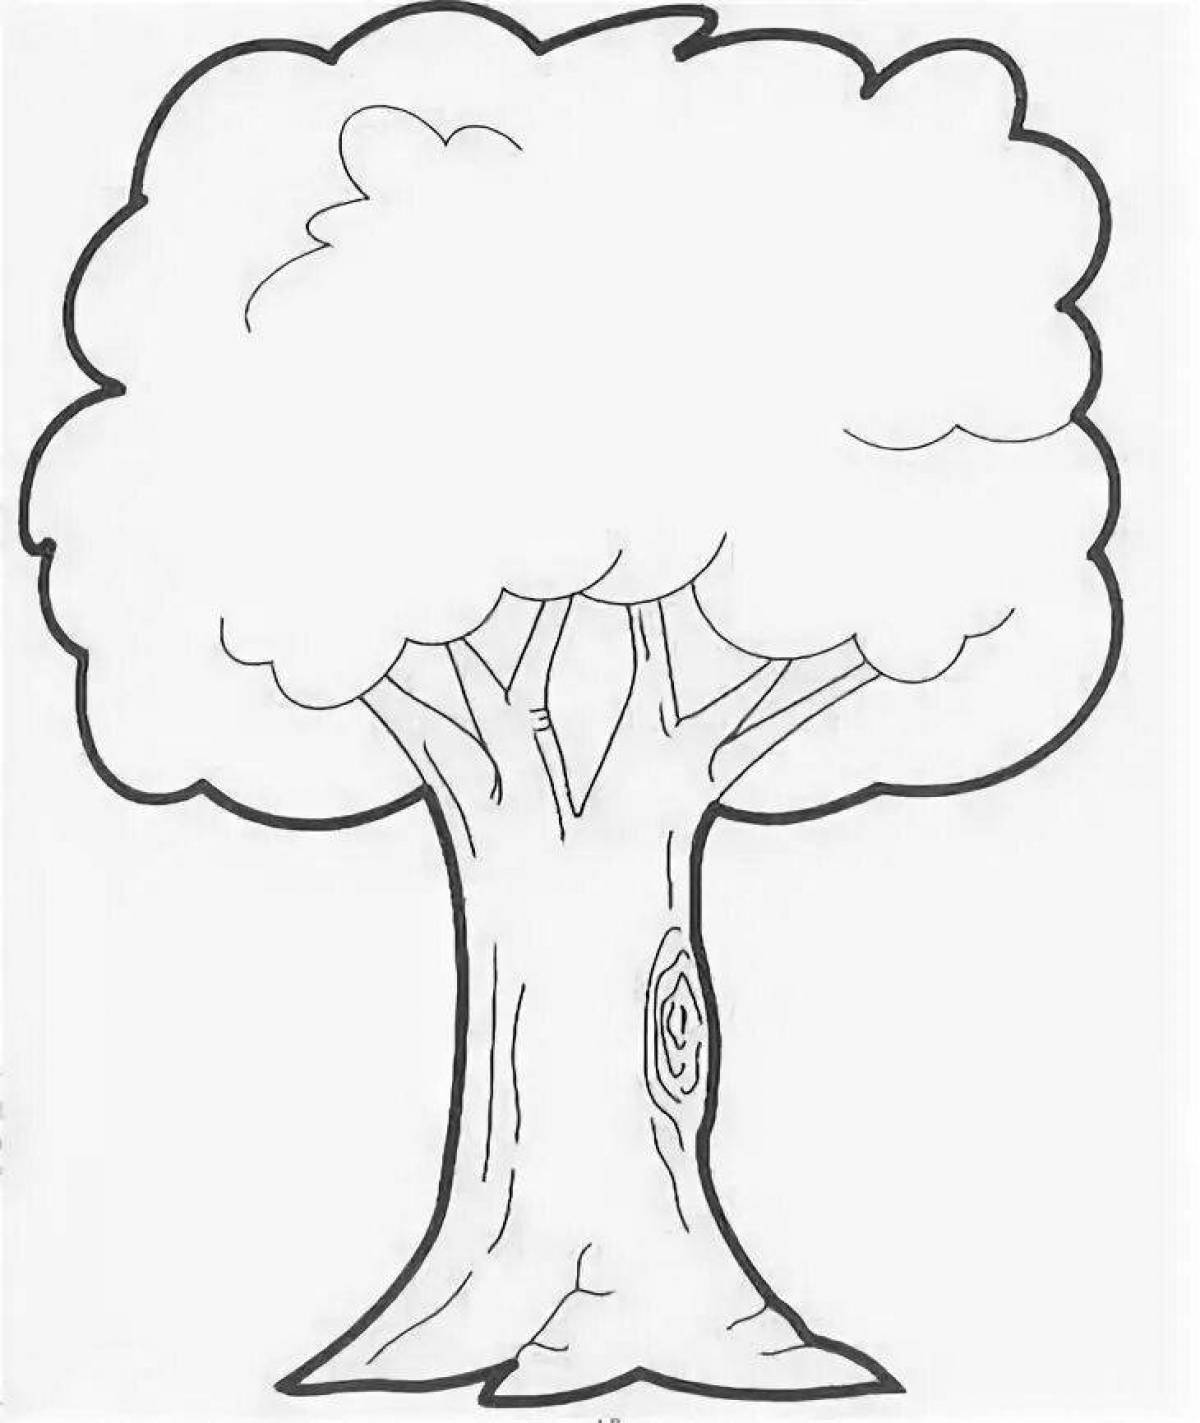 Colored tree trunk coloring page for kids